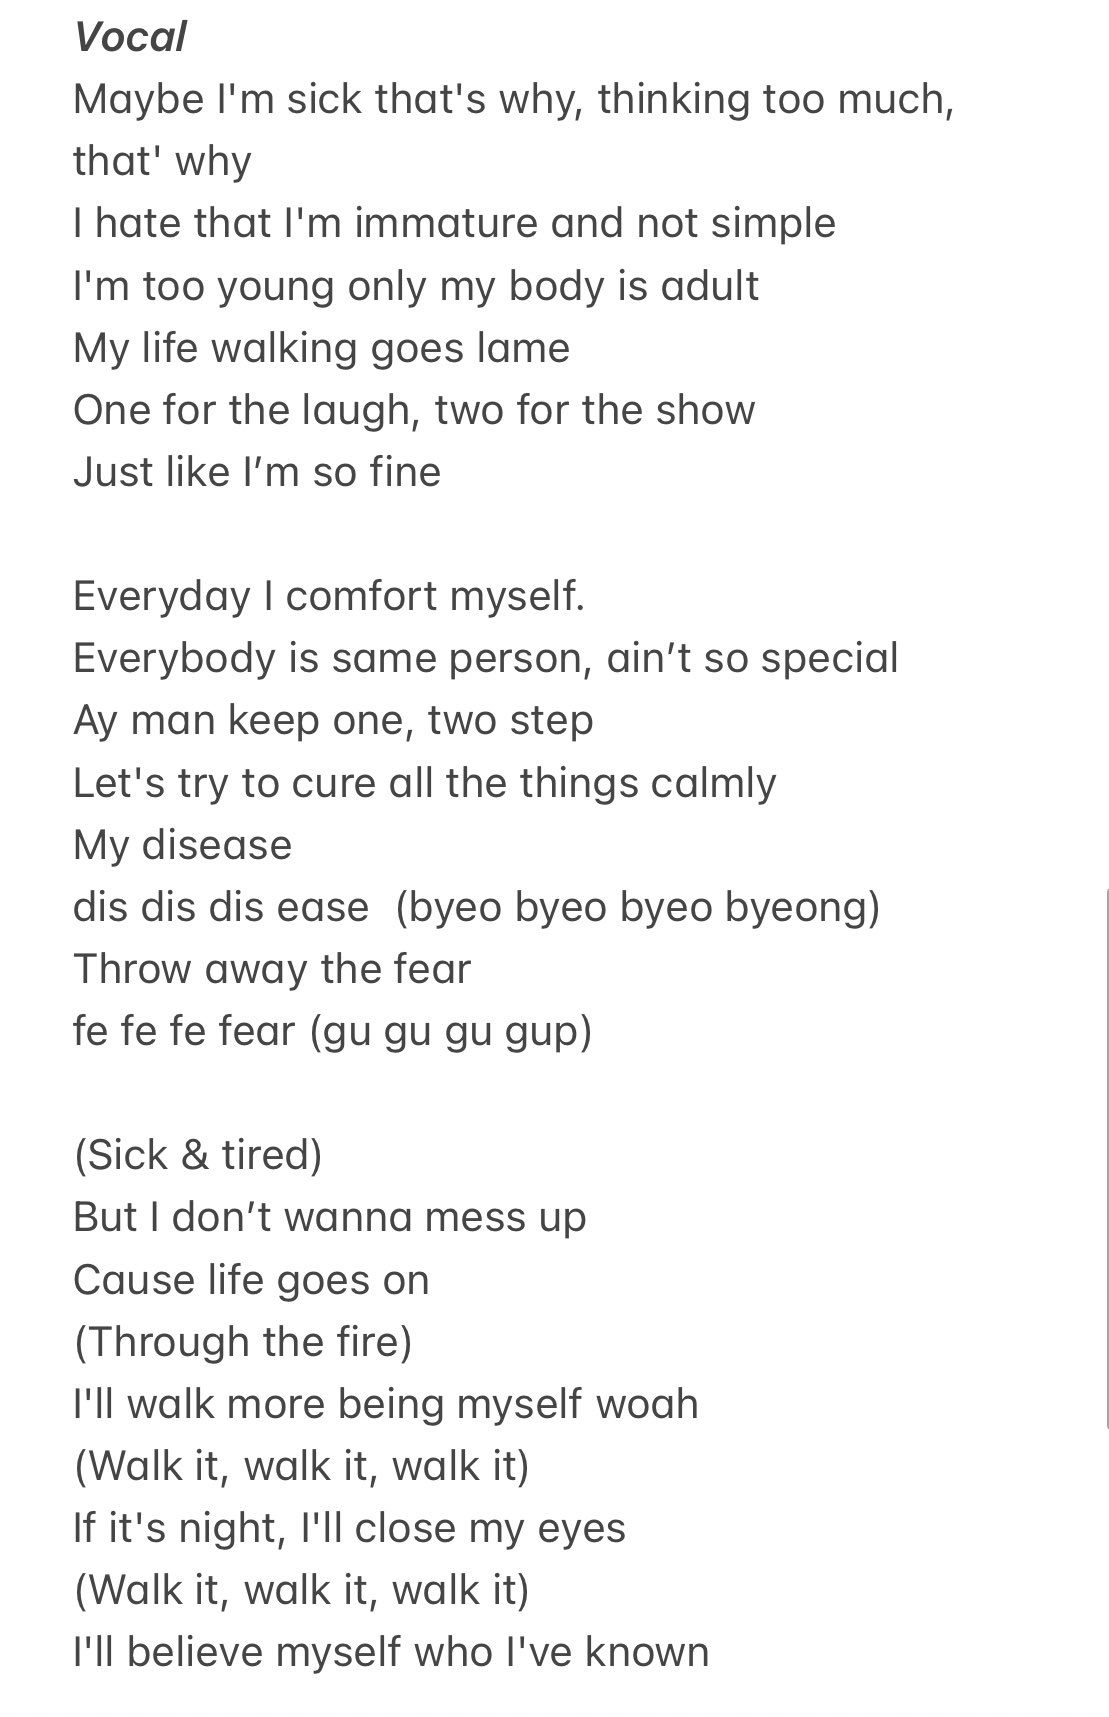 Soo Choi Rest Dis Ease Lyrics There Are Wordplays Disease In Korean Is 병 Byeong And It Also Means Bottle Work In Korean Is Ill So It Can Be Ill In English